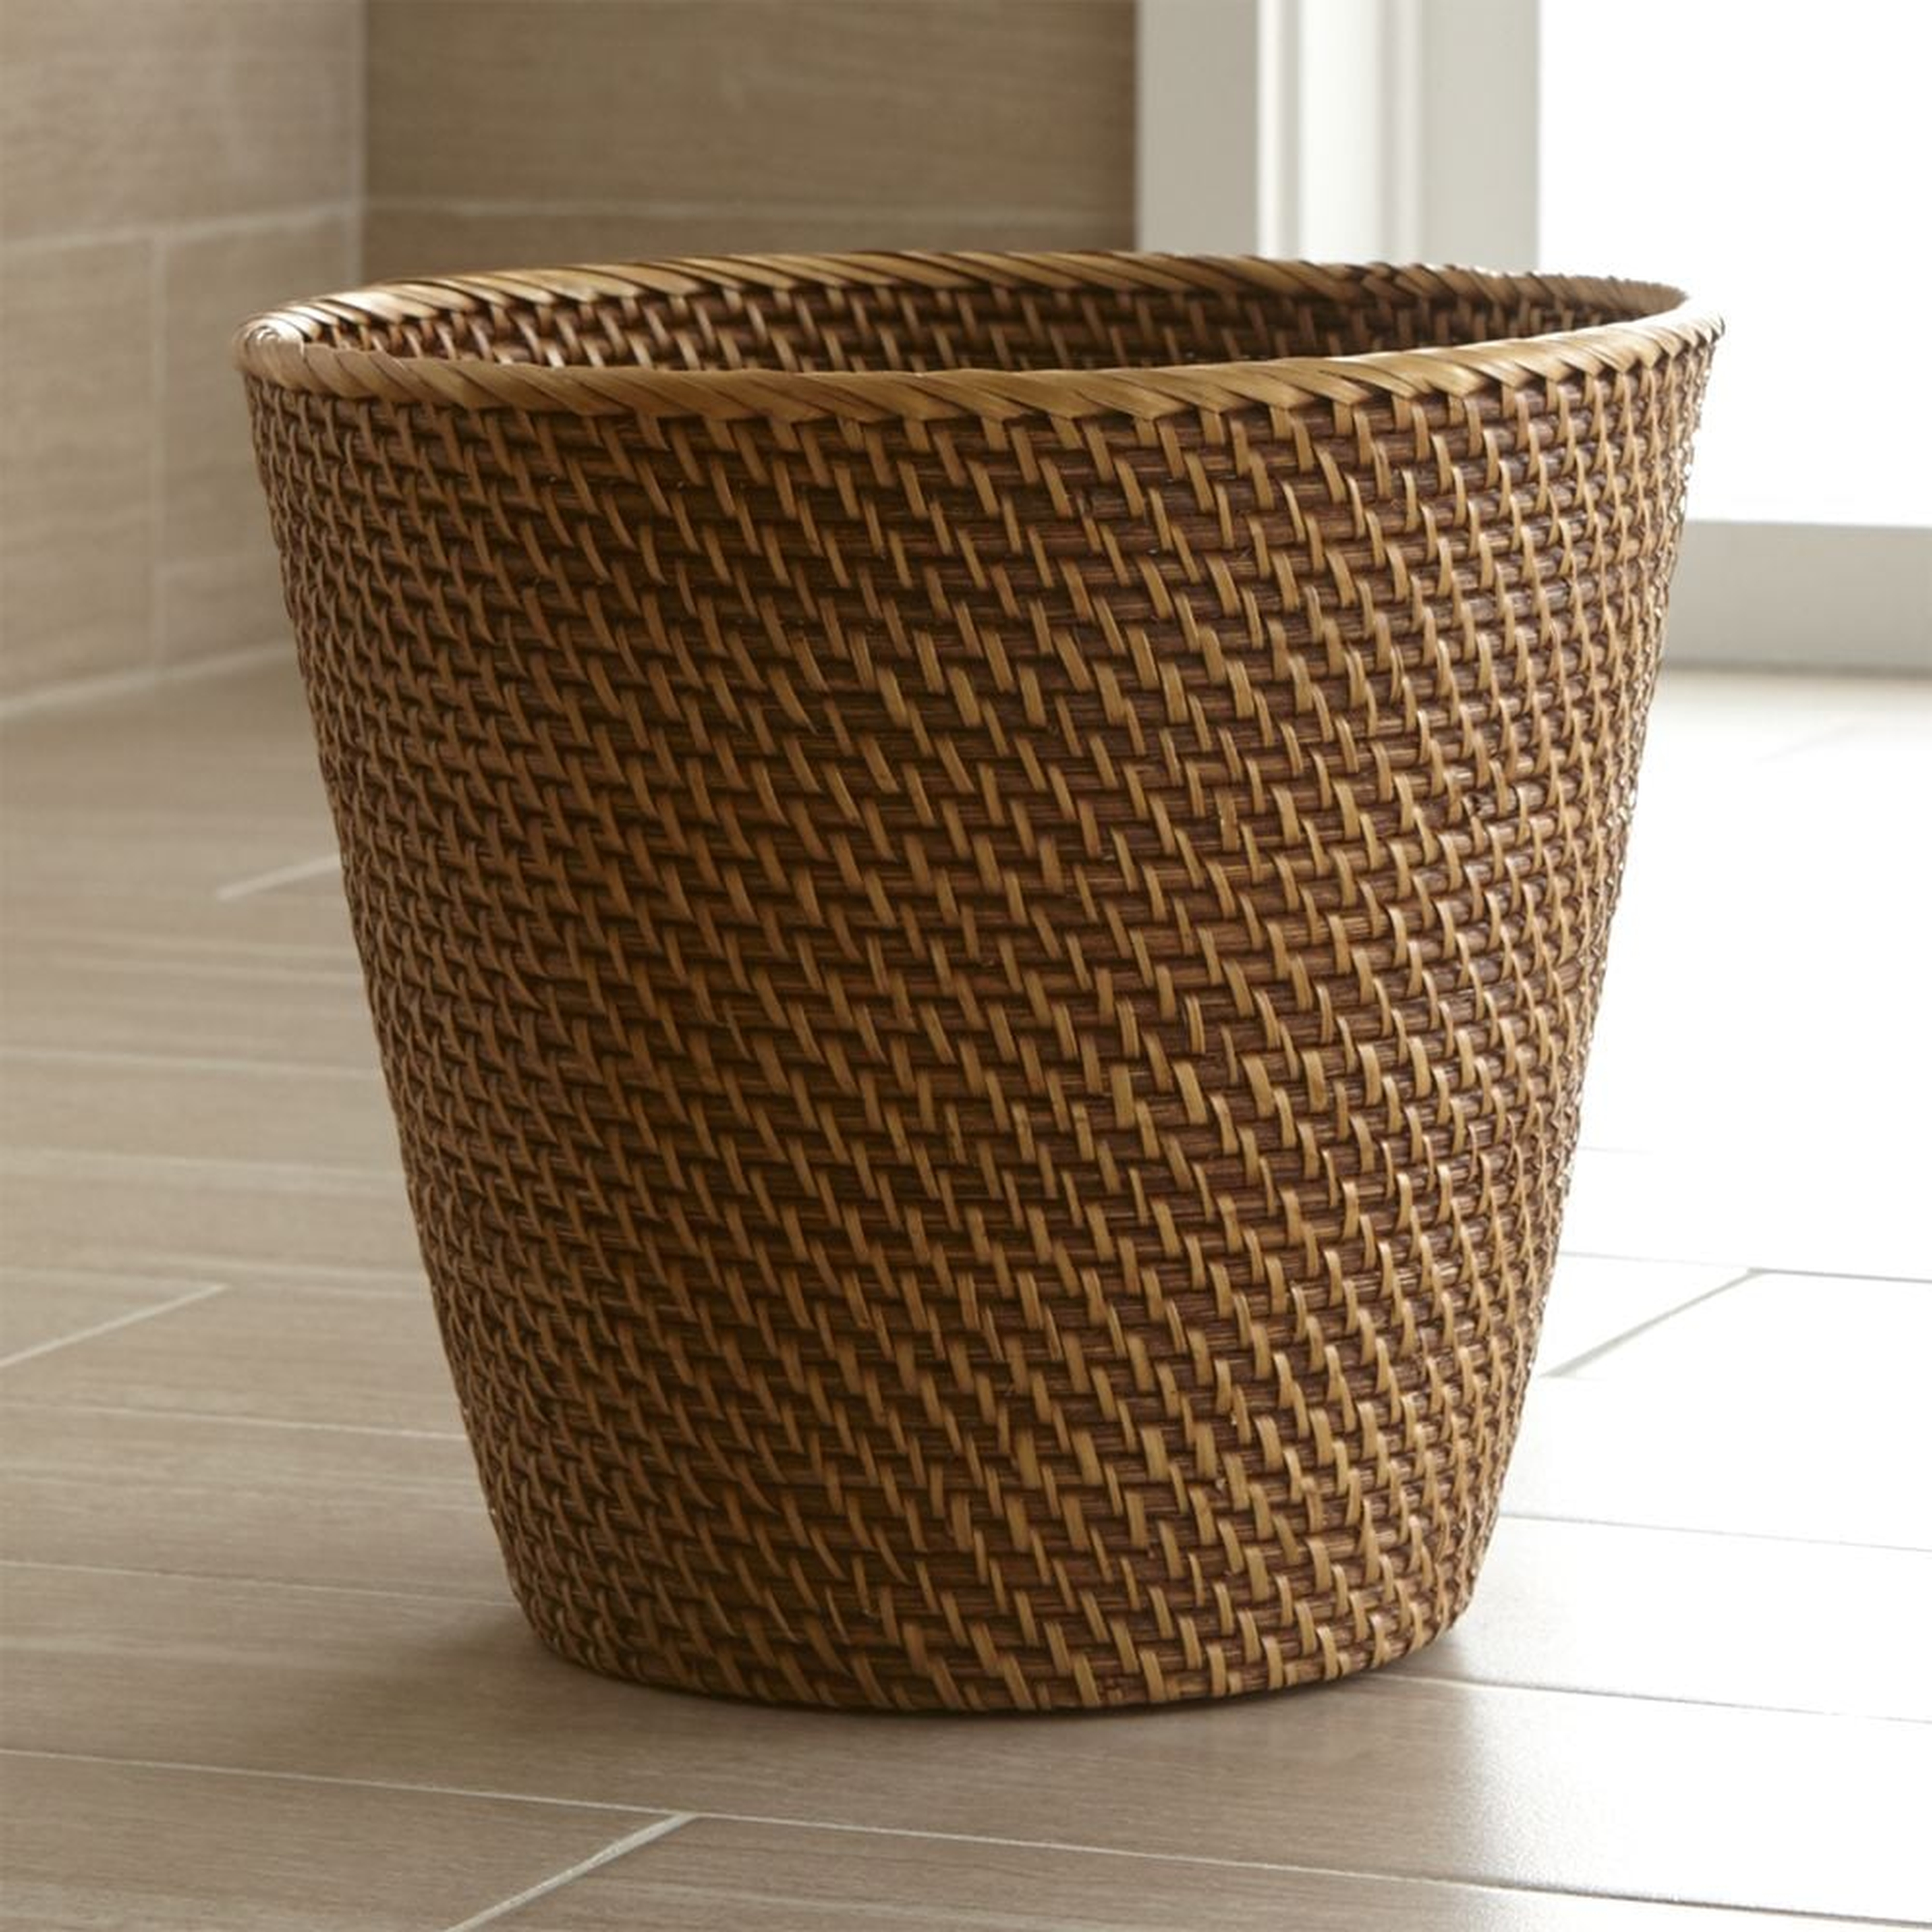 Sedona Honey Tapered Waste Basket/Trash Can - Crate and Barrel